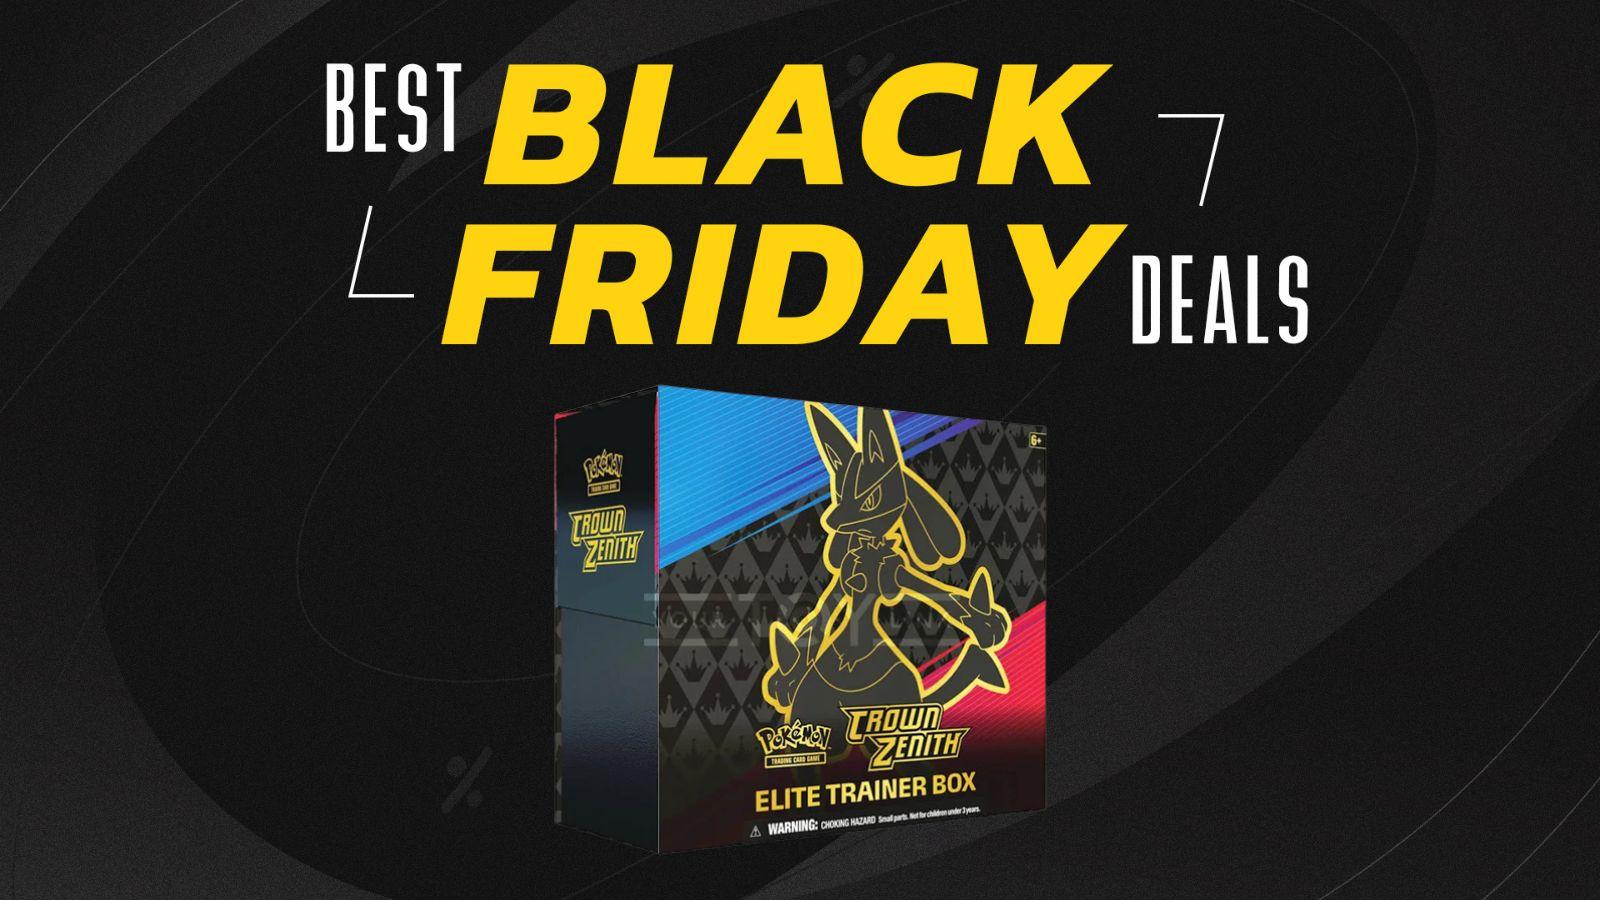 Best Black Friday Deals banner, underneath is a Pokemon ETB Box showing Lucario, a dog like humanoid Pokemon standing up